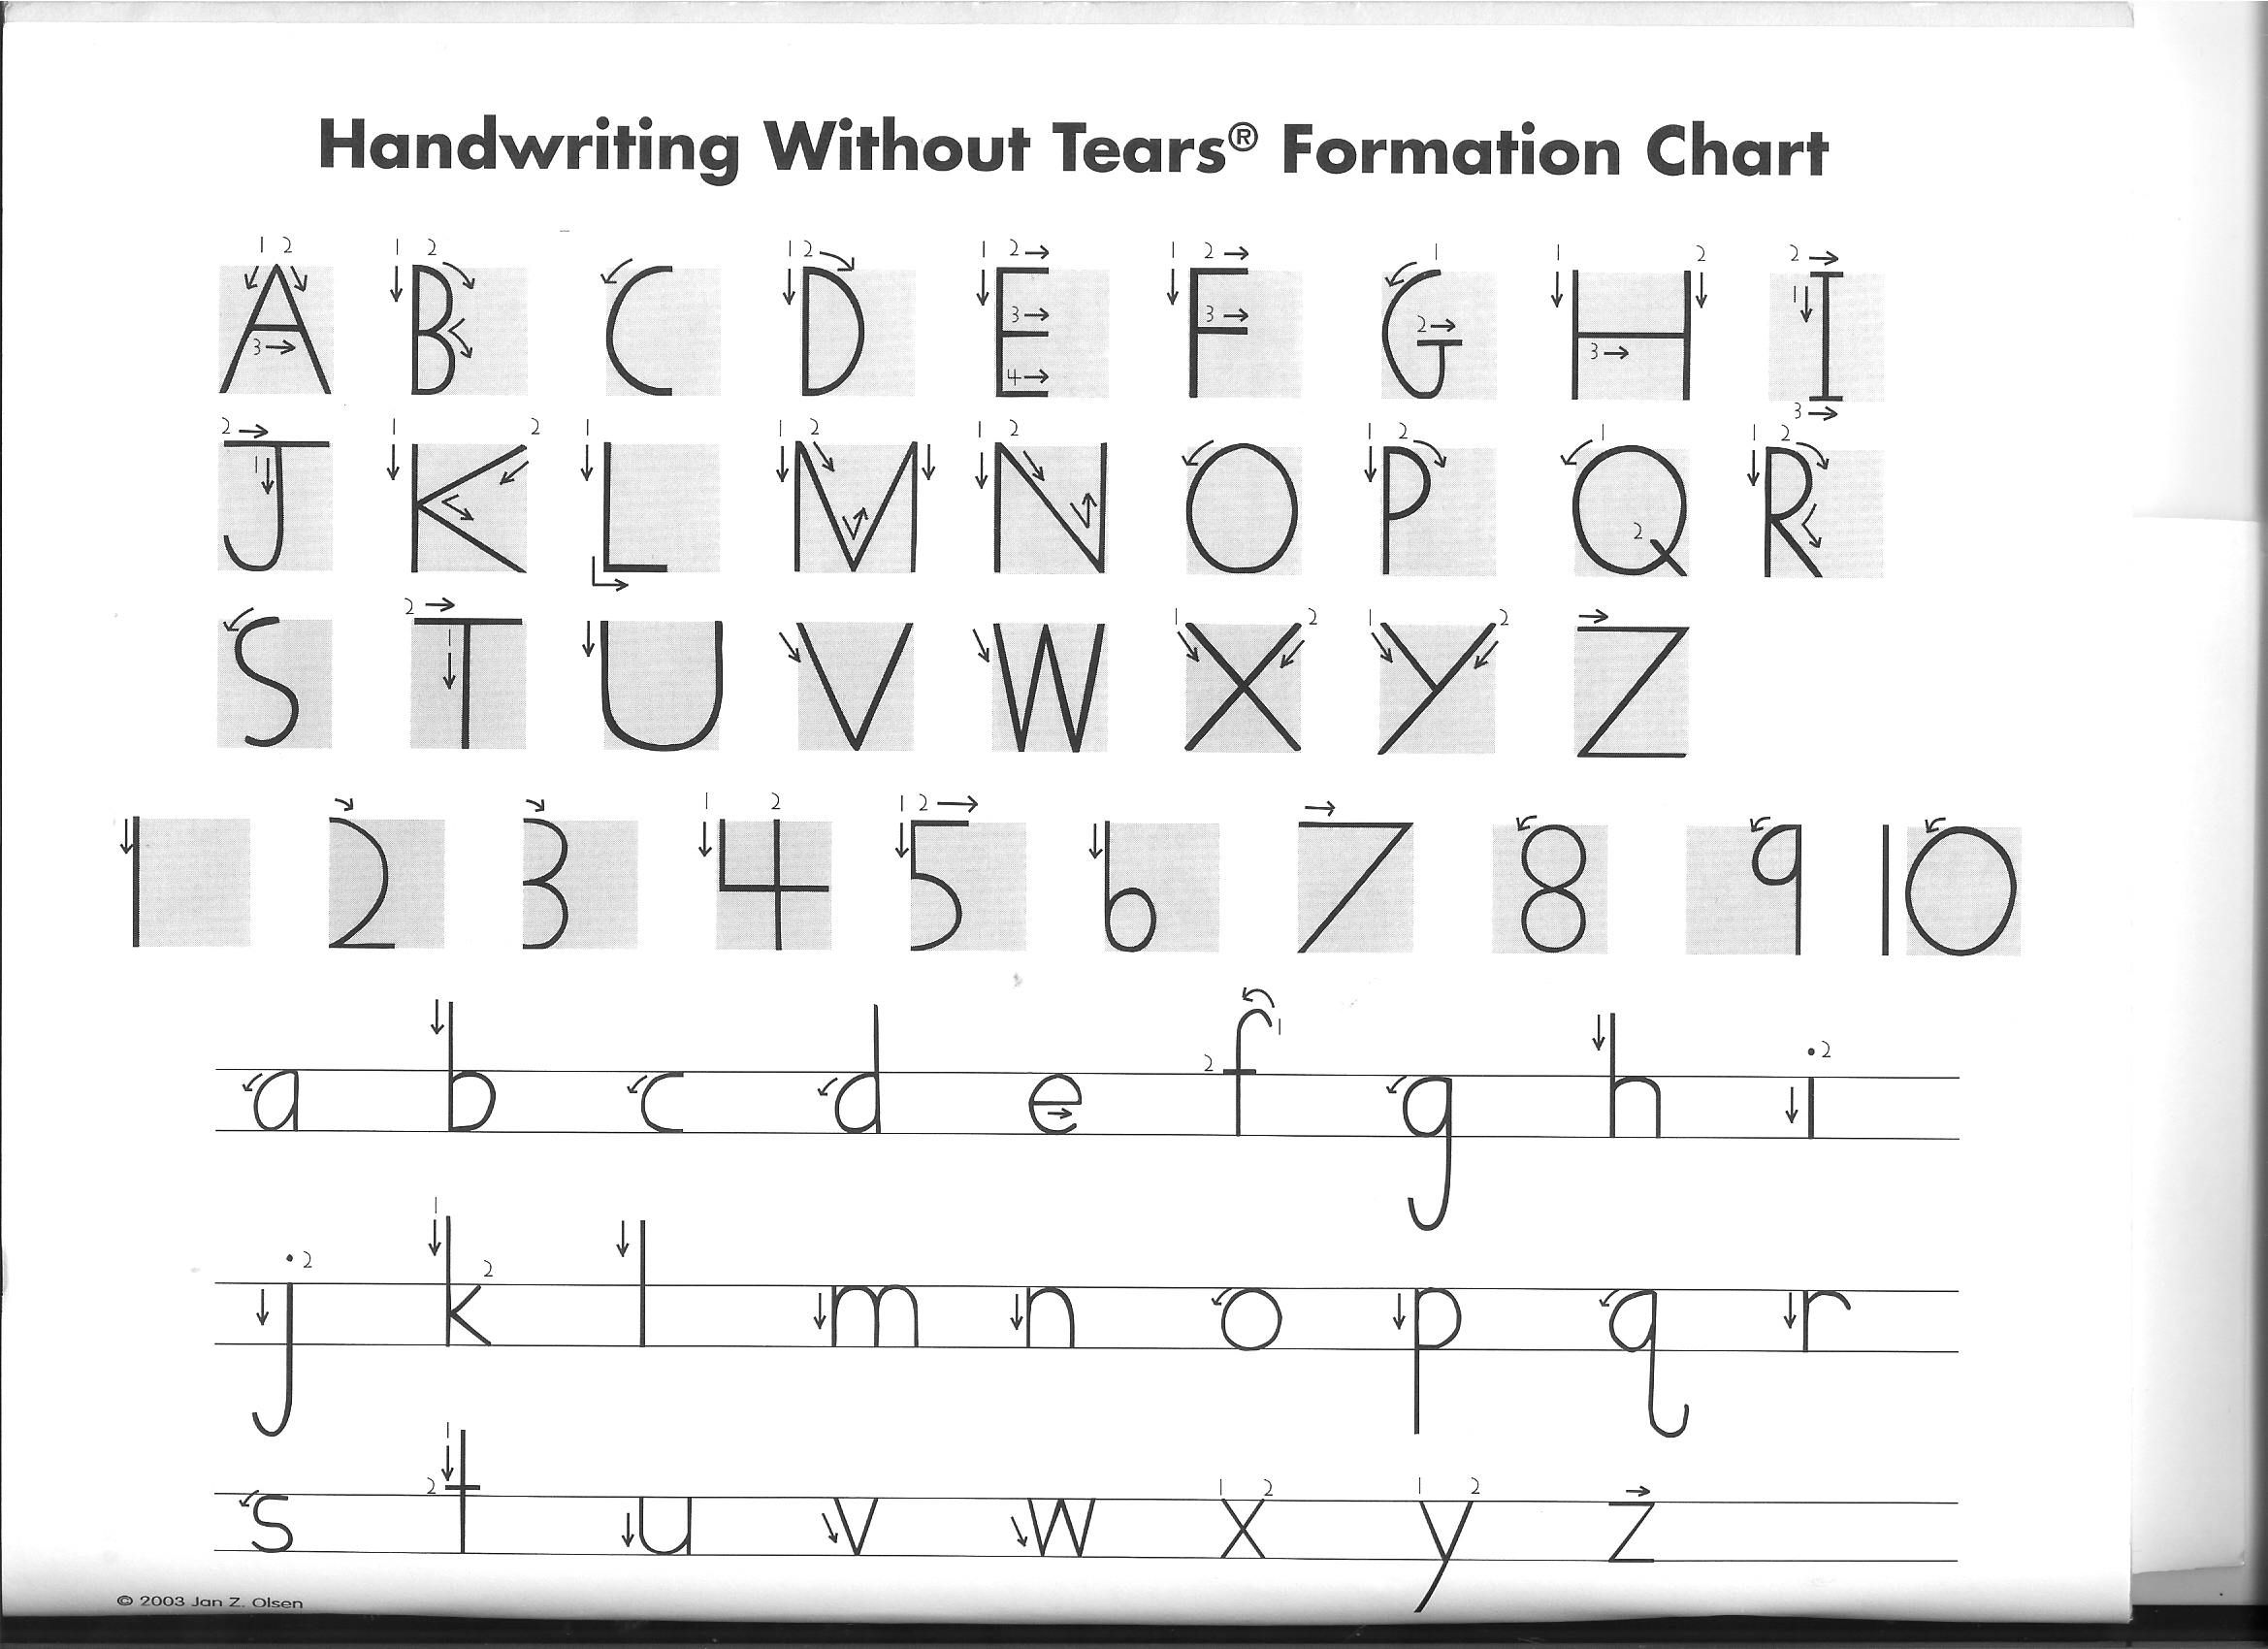 Handwriting Without Tears Letter Formation